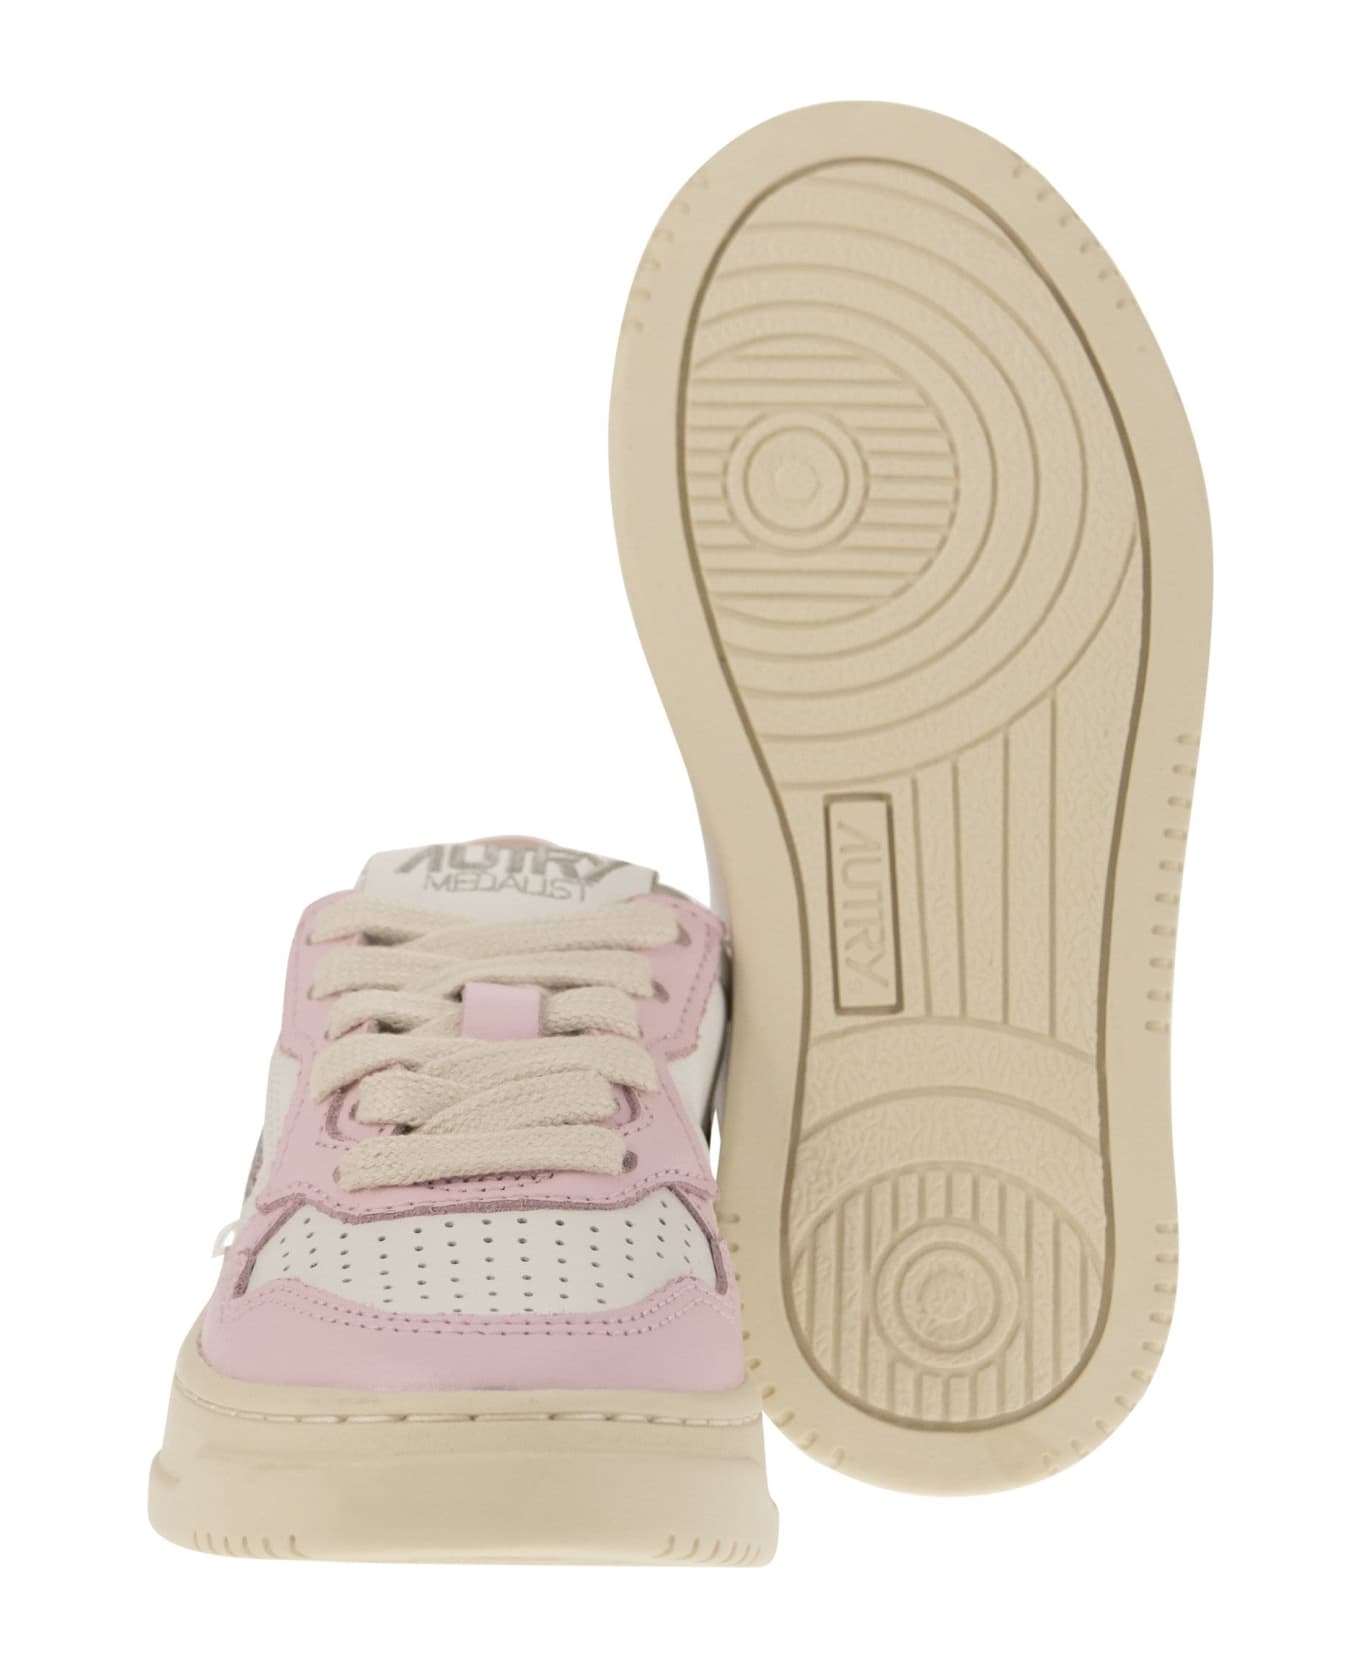 Autry Medalist Low - Two-tone Trainer - White/pink